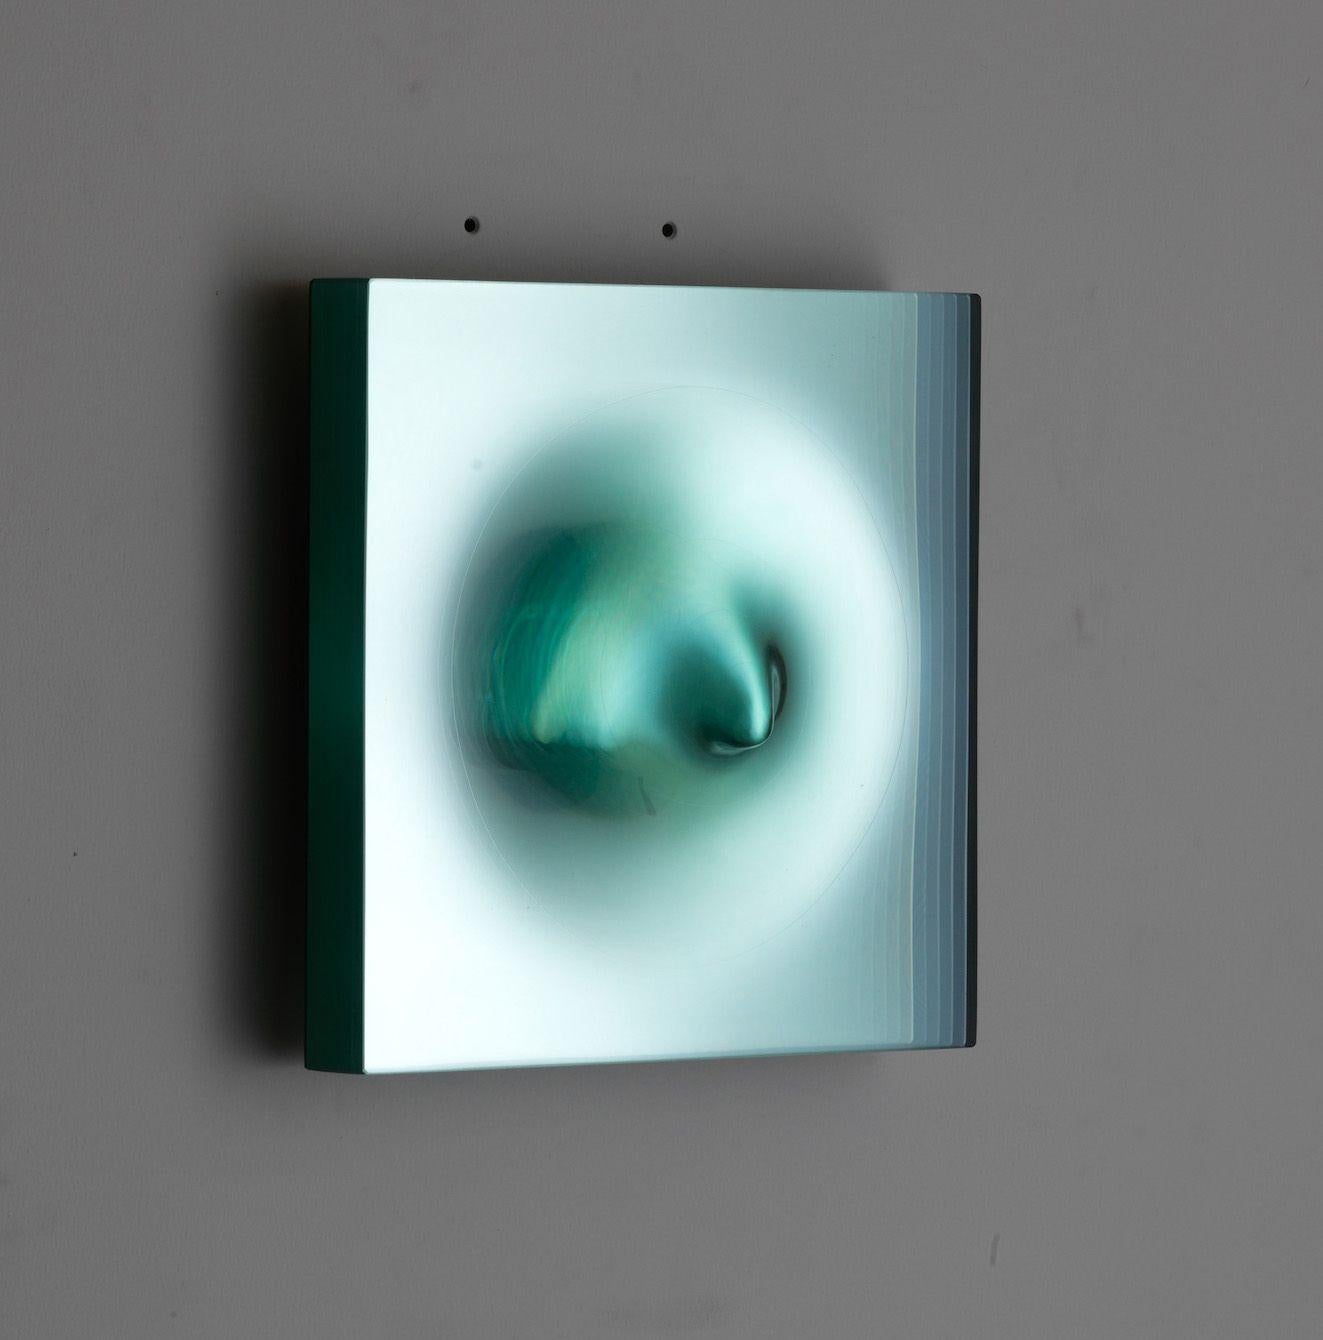 Heat reflecting glass and half mirror, 25 cm × 25 cm × 7 cm.
Limited edition of 8 + IV artist proof, delivered with a certificate of authenticity signed by the artist.
In the ‘Move’ series, which began in the 2000’s, the artist presents vertical